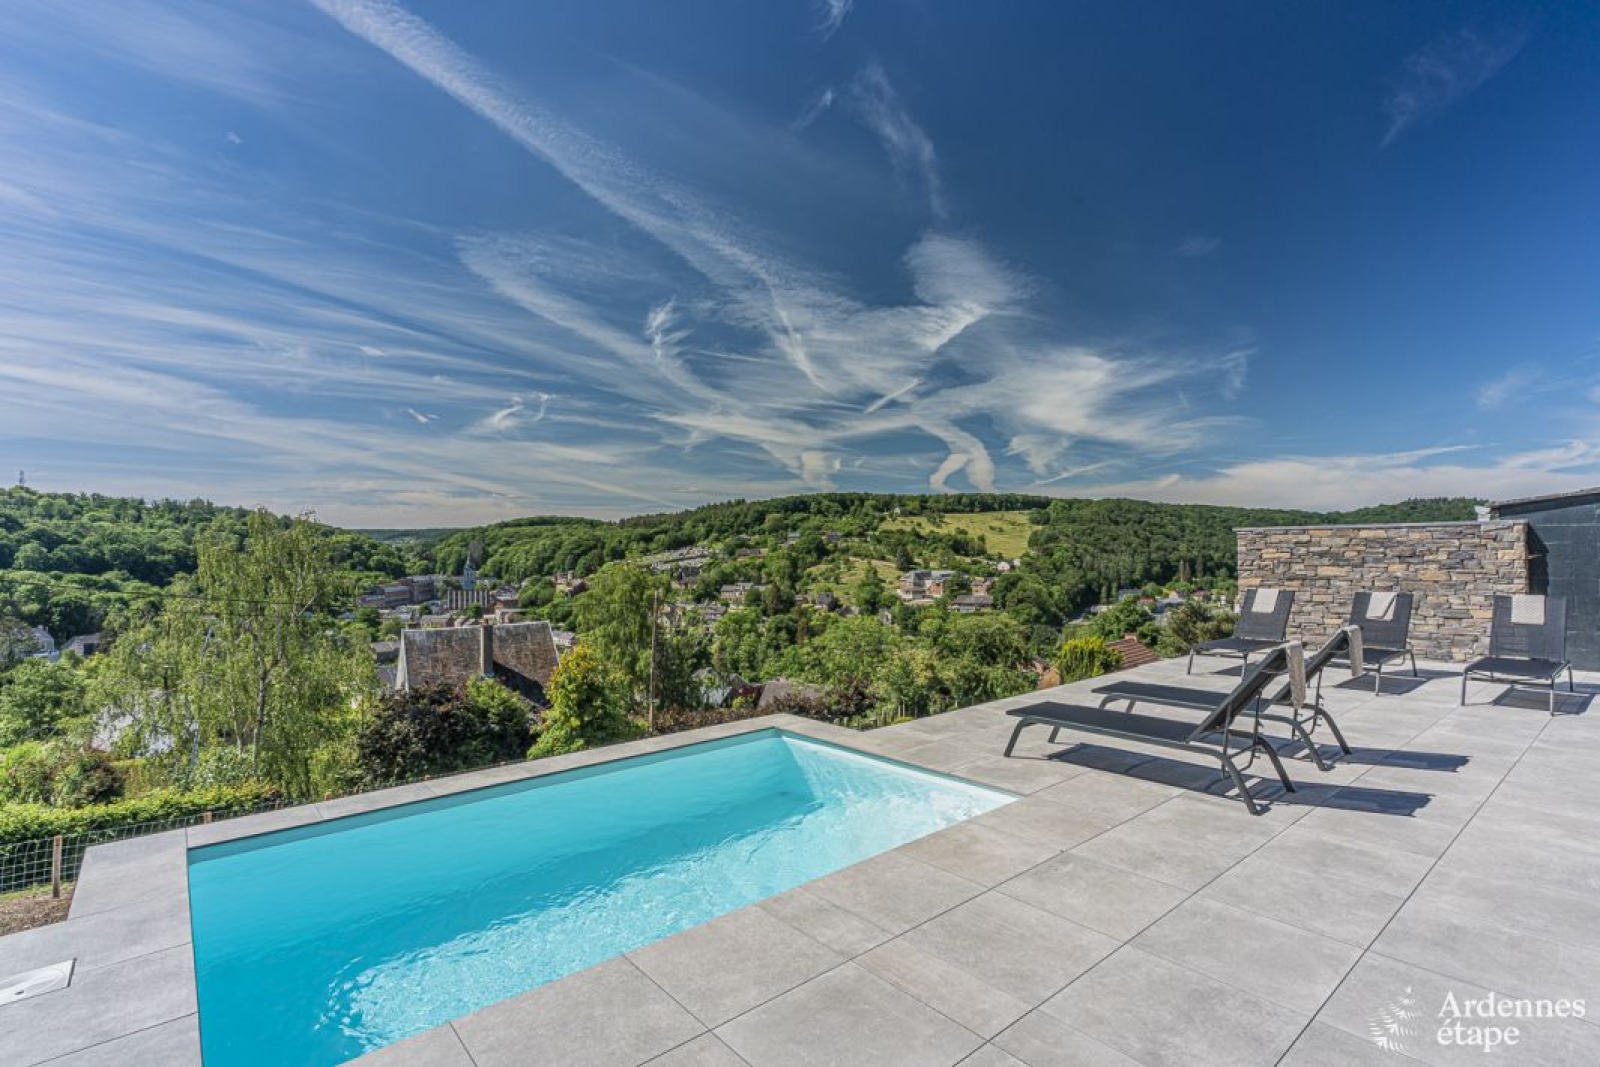 Outdoor swimming pool - Gîtes and holiday homes in Ardenne